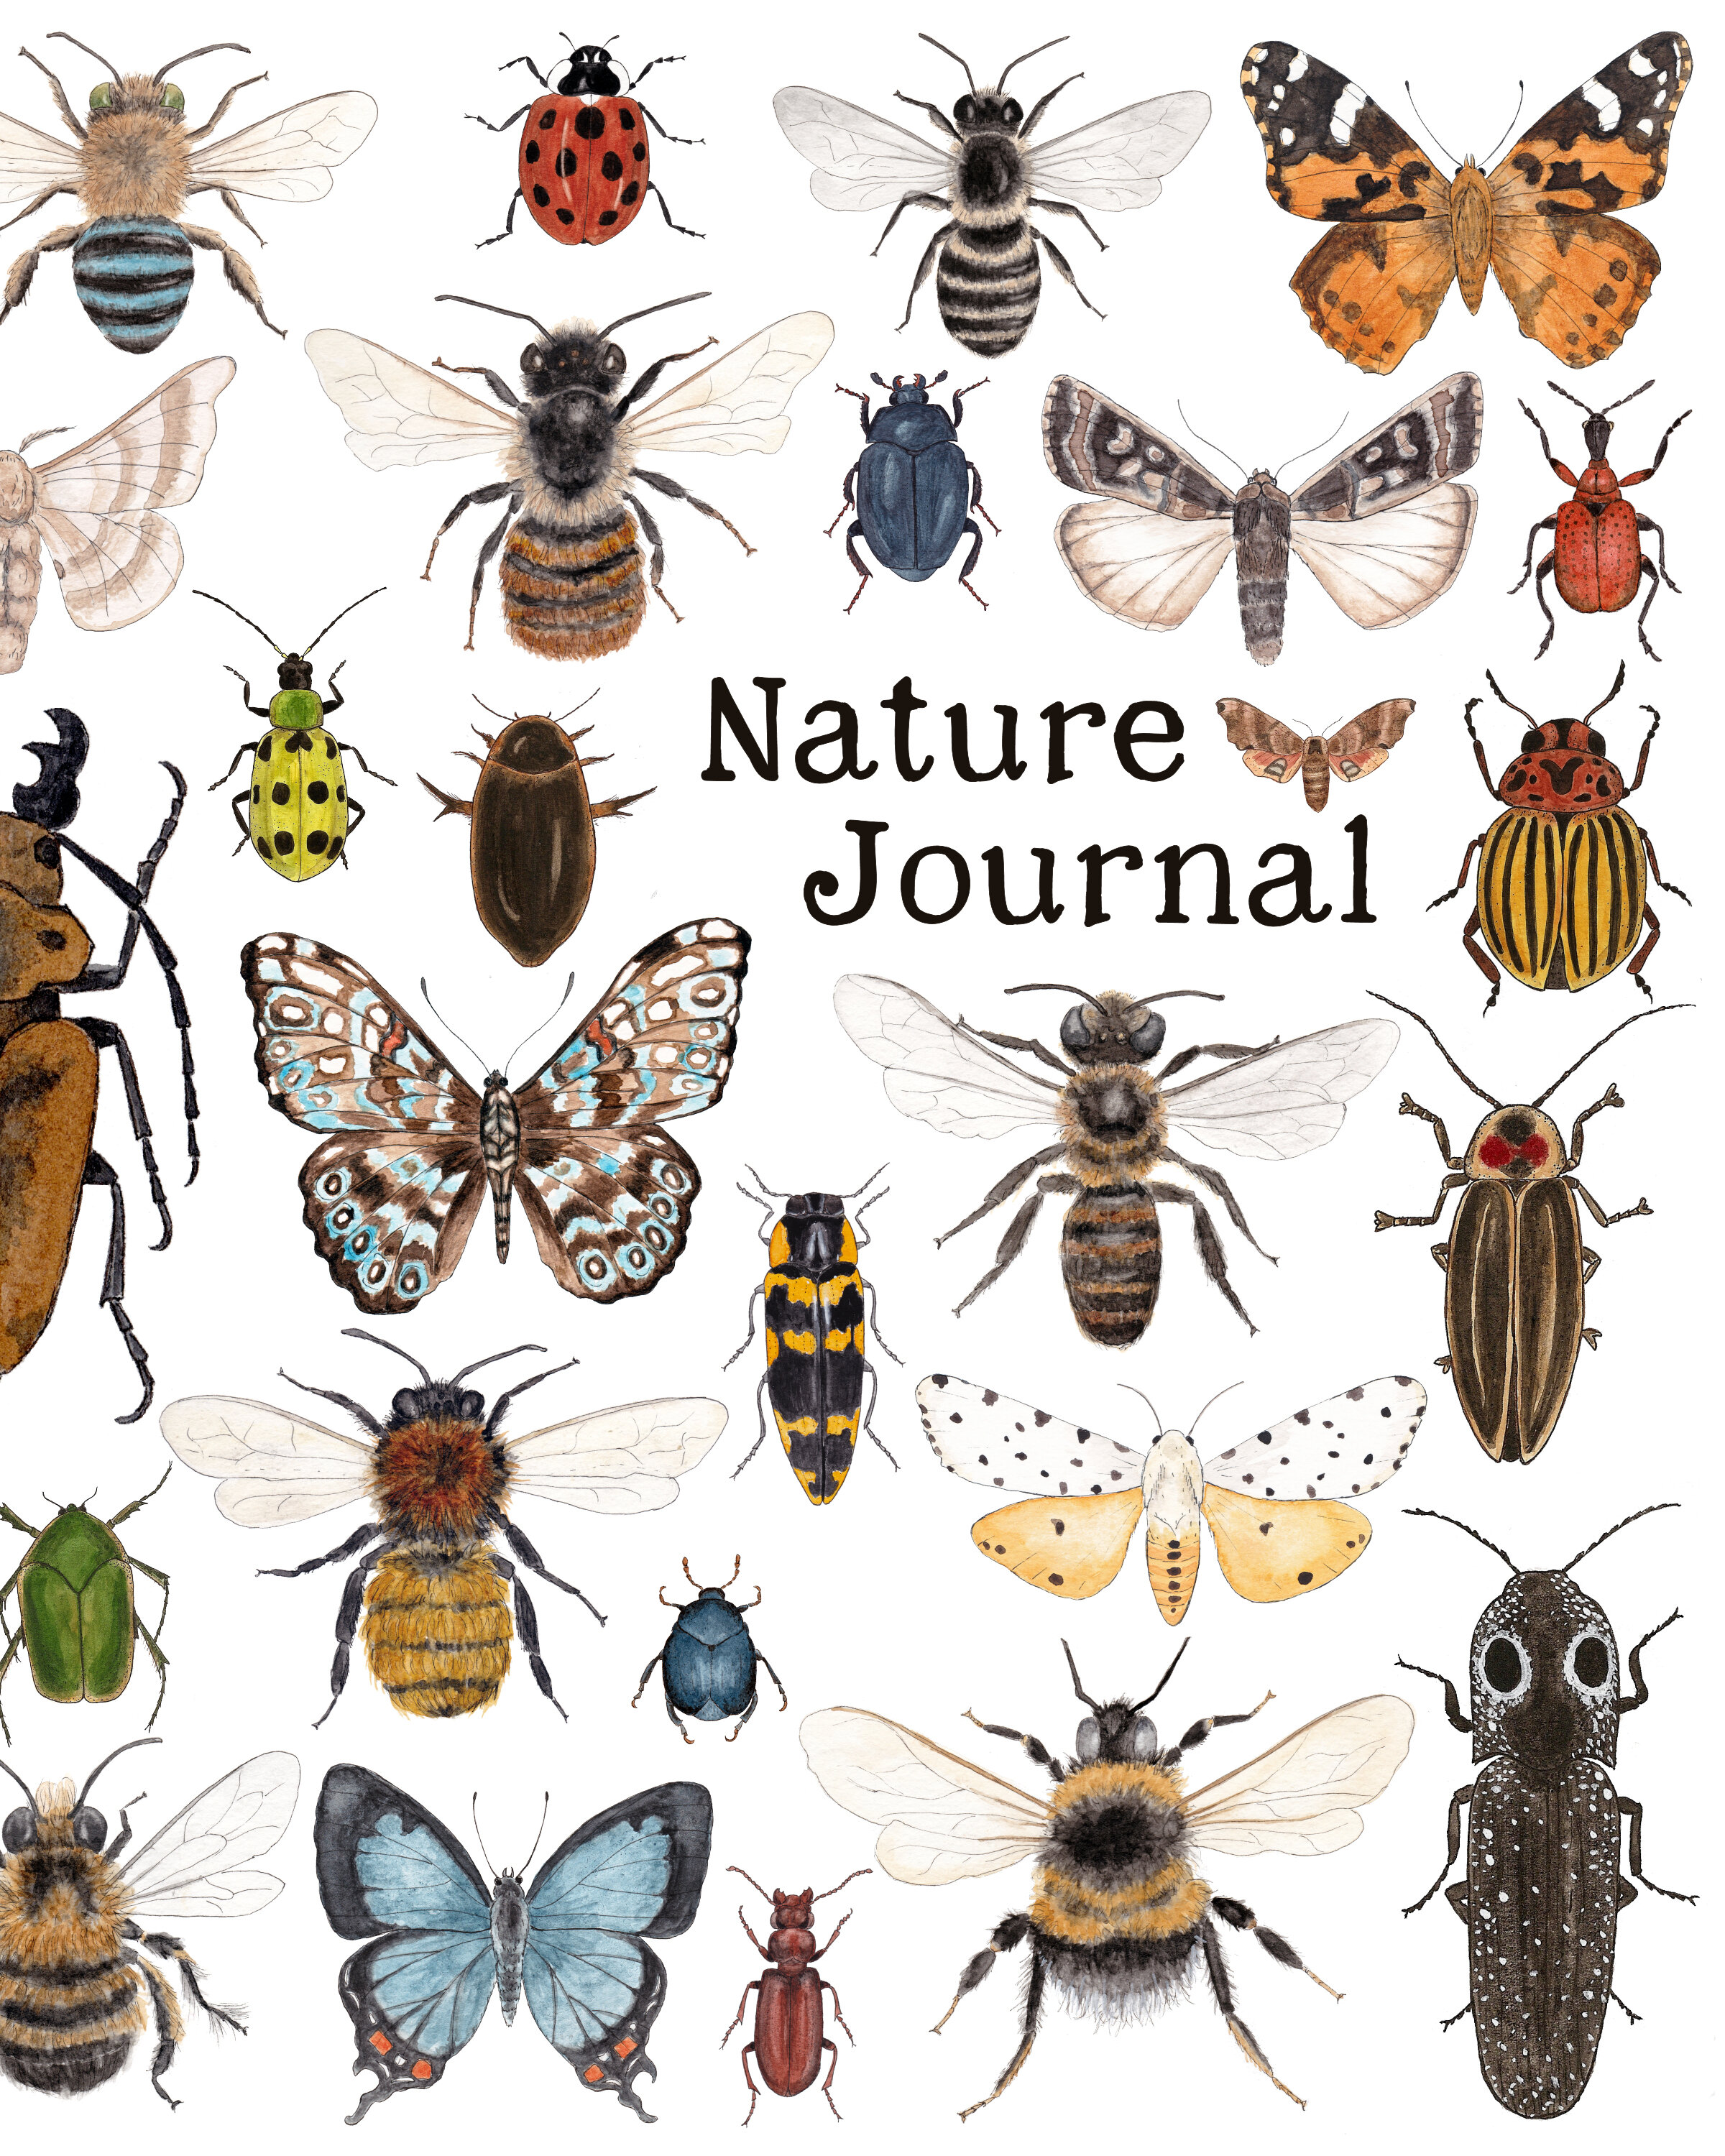 Nature Journal - Assorted Insects Cover Art